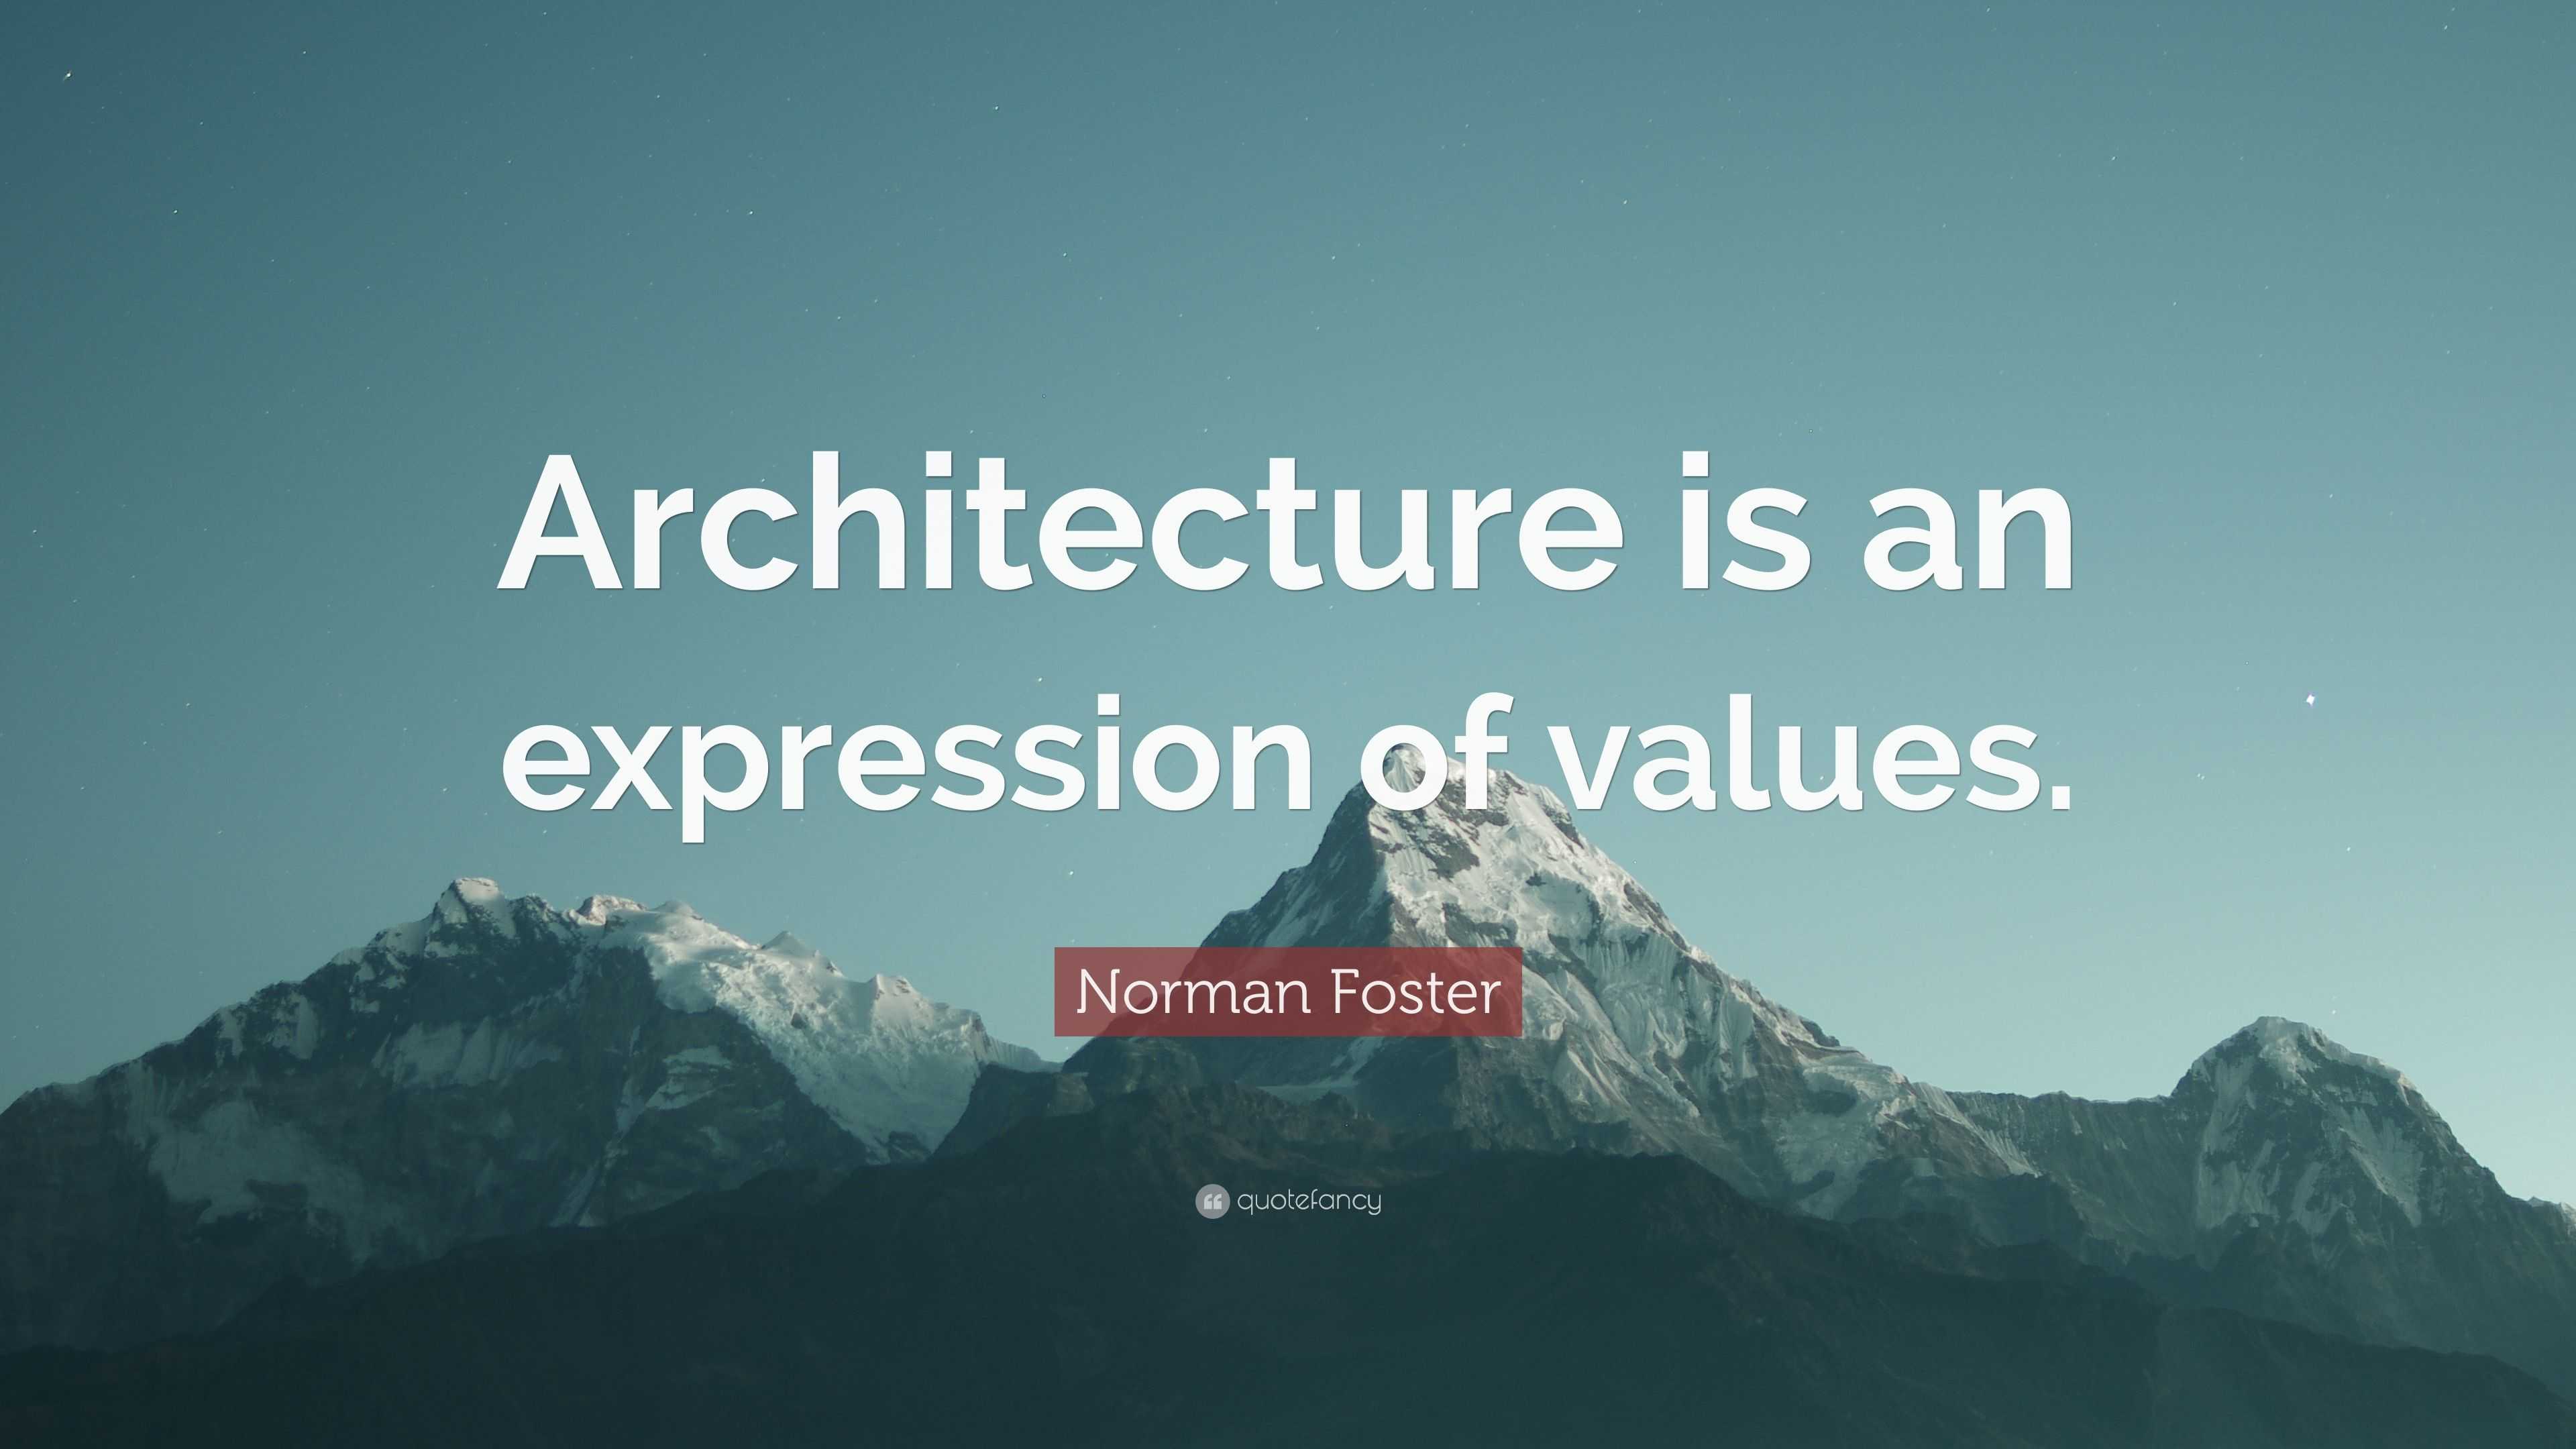 Norman Foster Quote: “Architecture is an expression of values.”